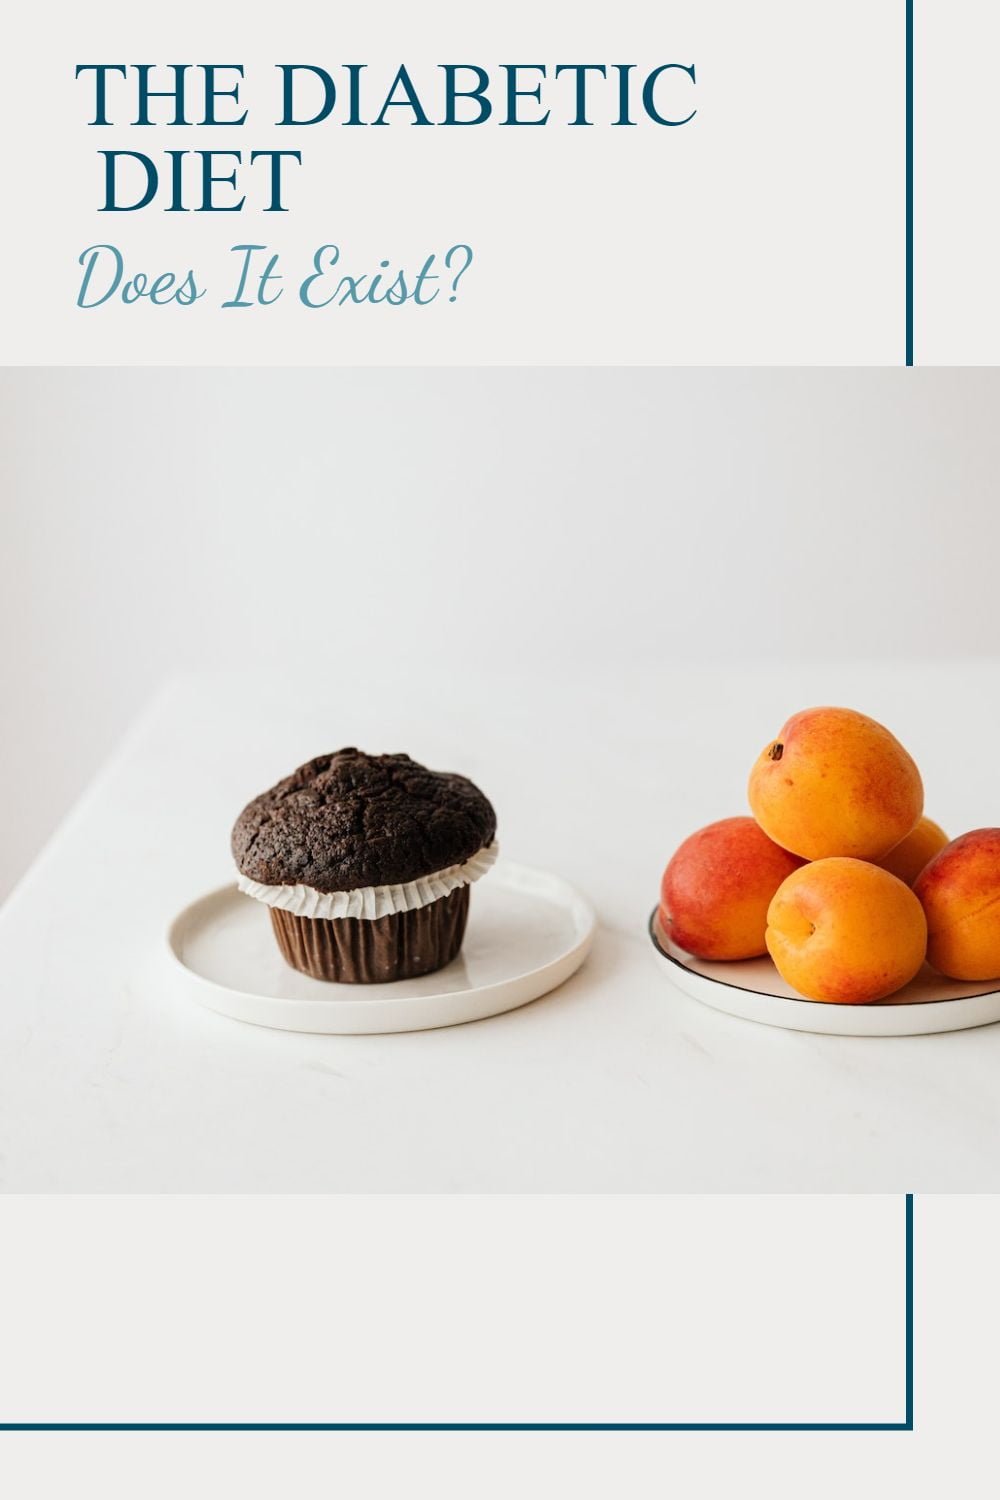 picture of a muffin and fruit to represent the diabetic diet